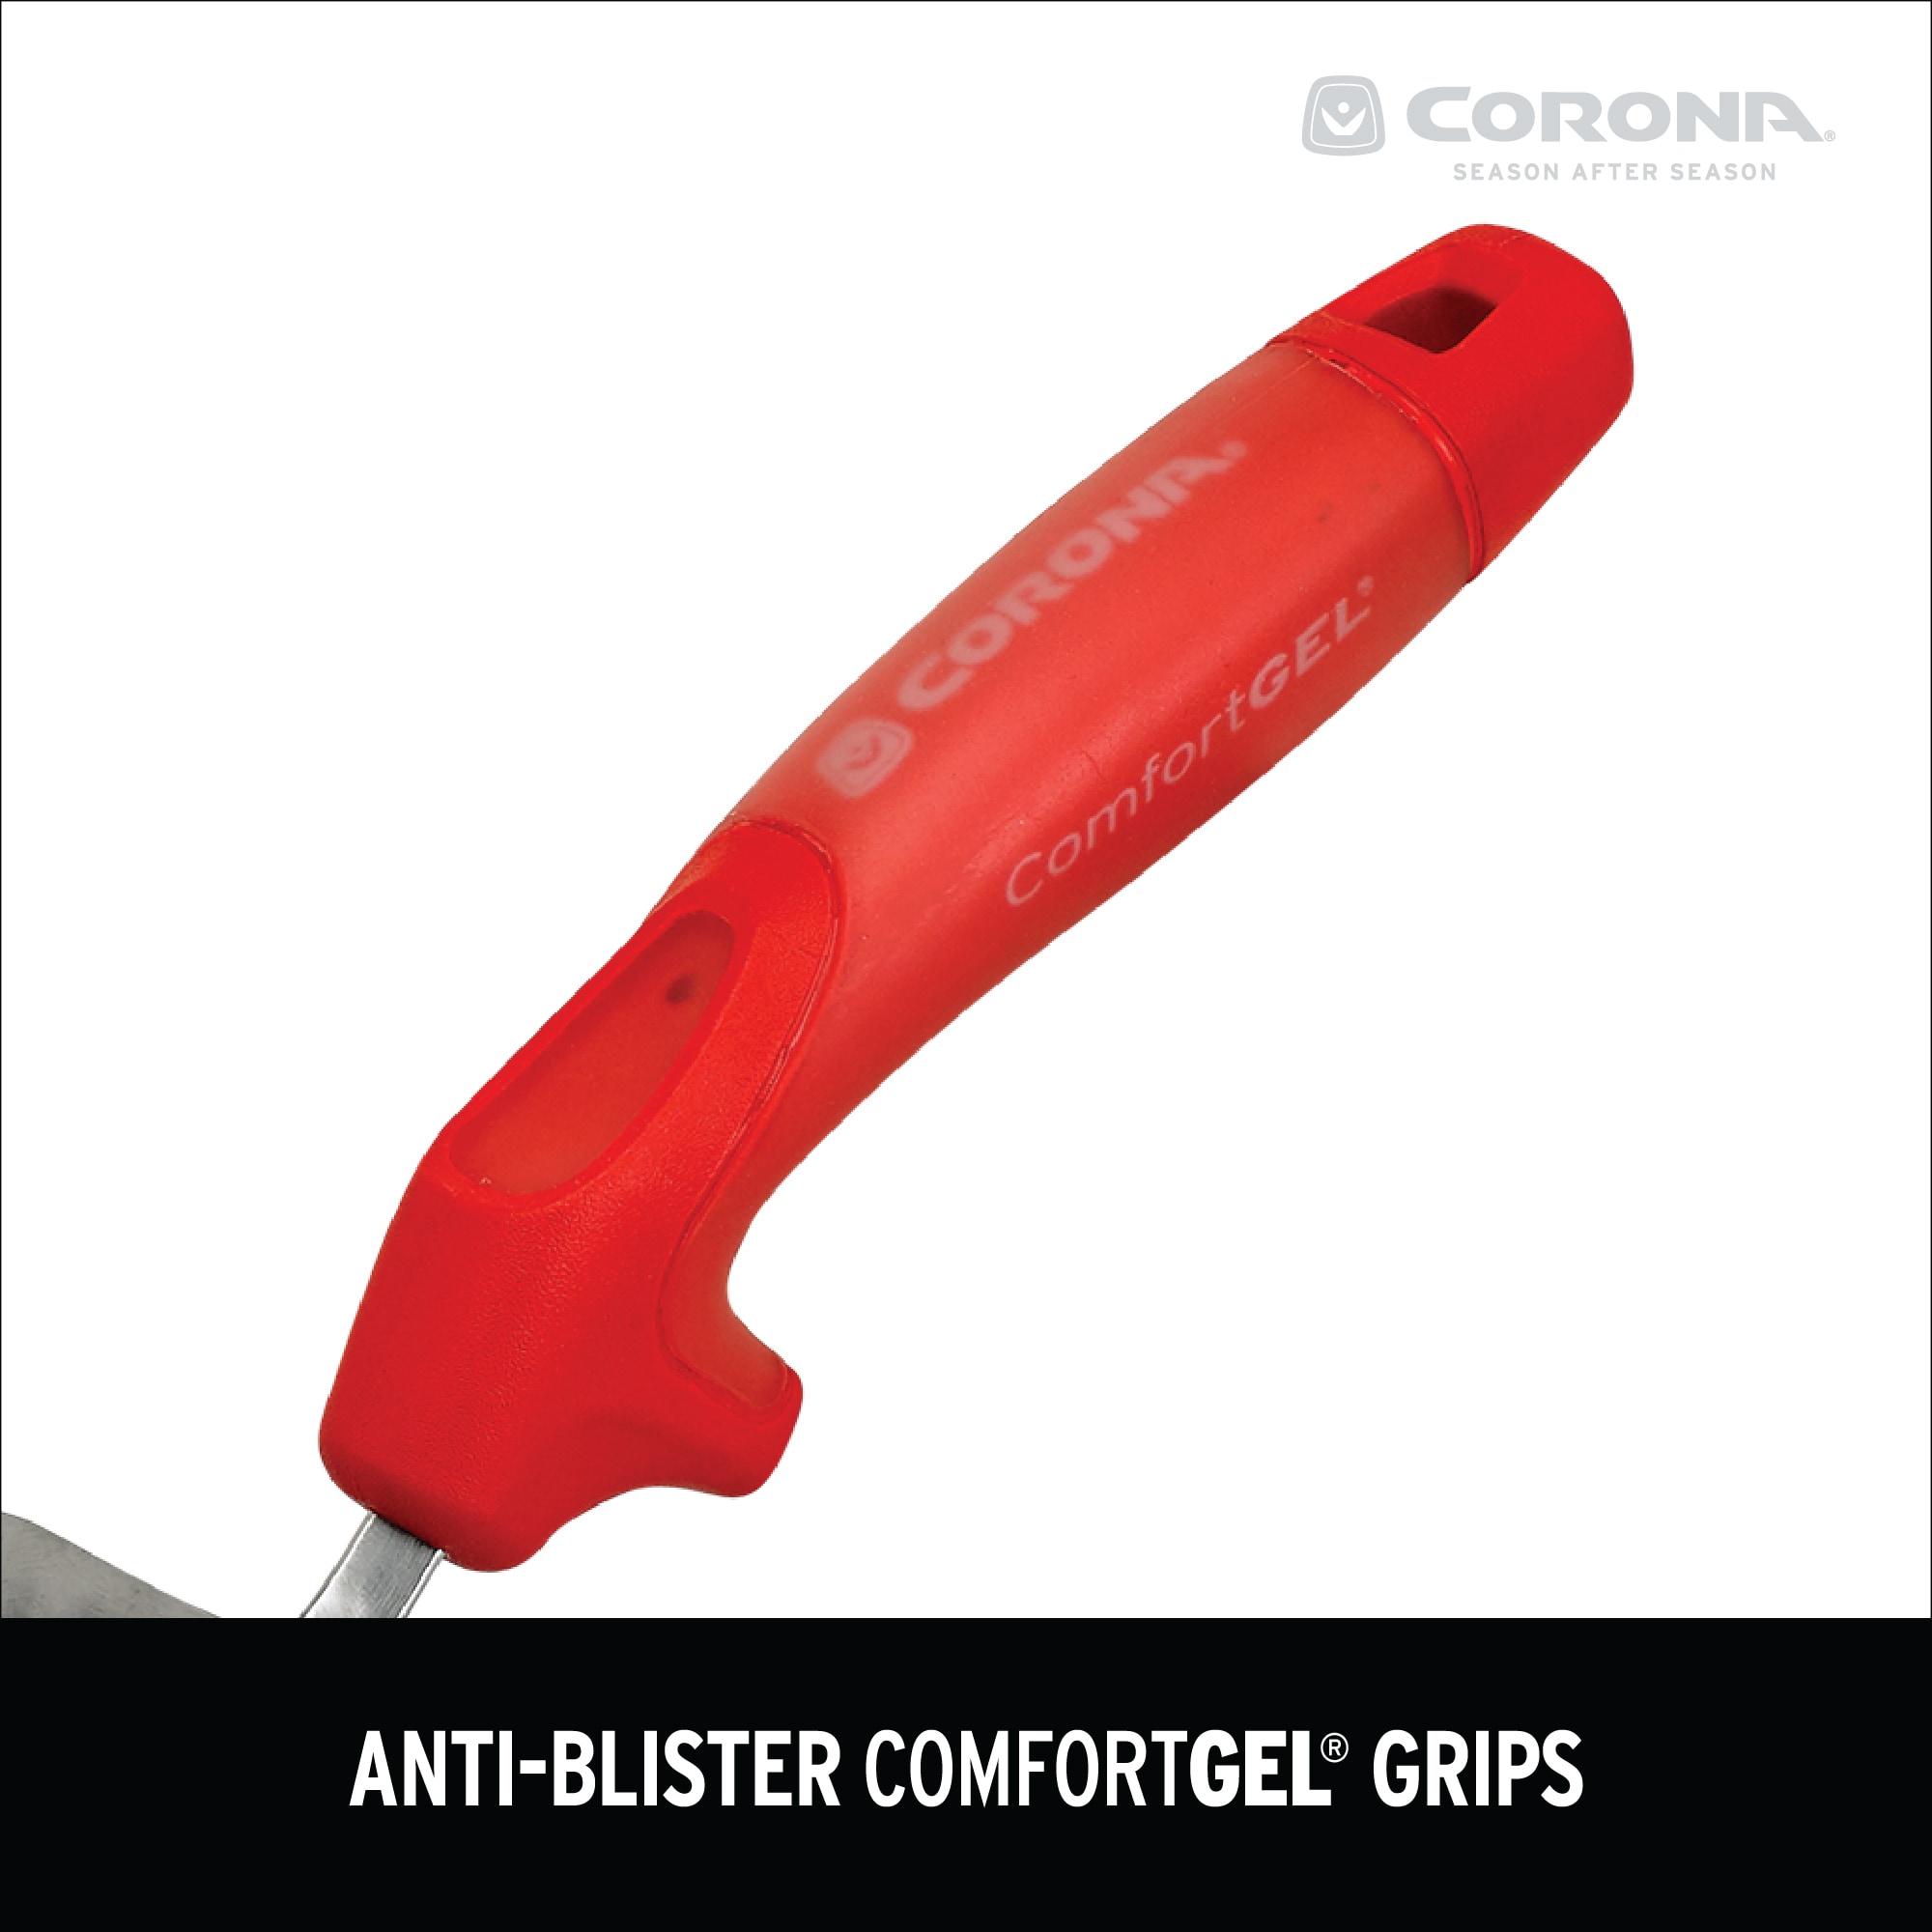 Comfy Grip 1.75 oz Stainless Steel #24 Portion Scoop - with Red